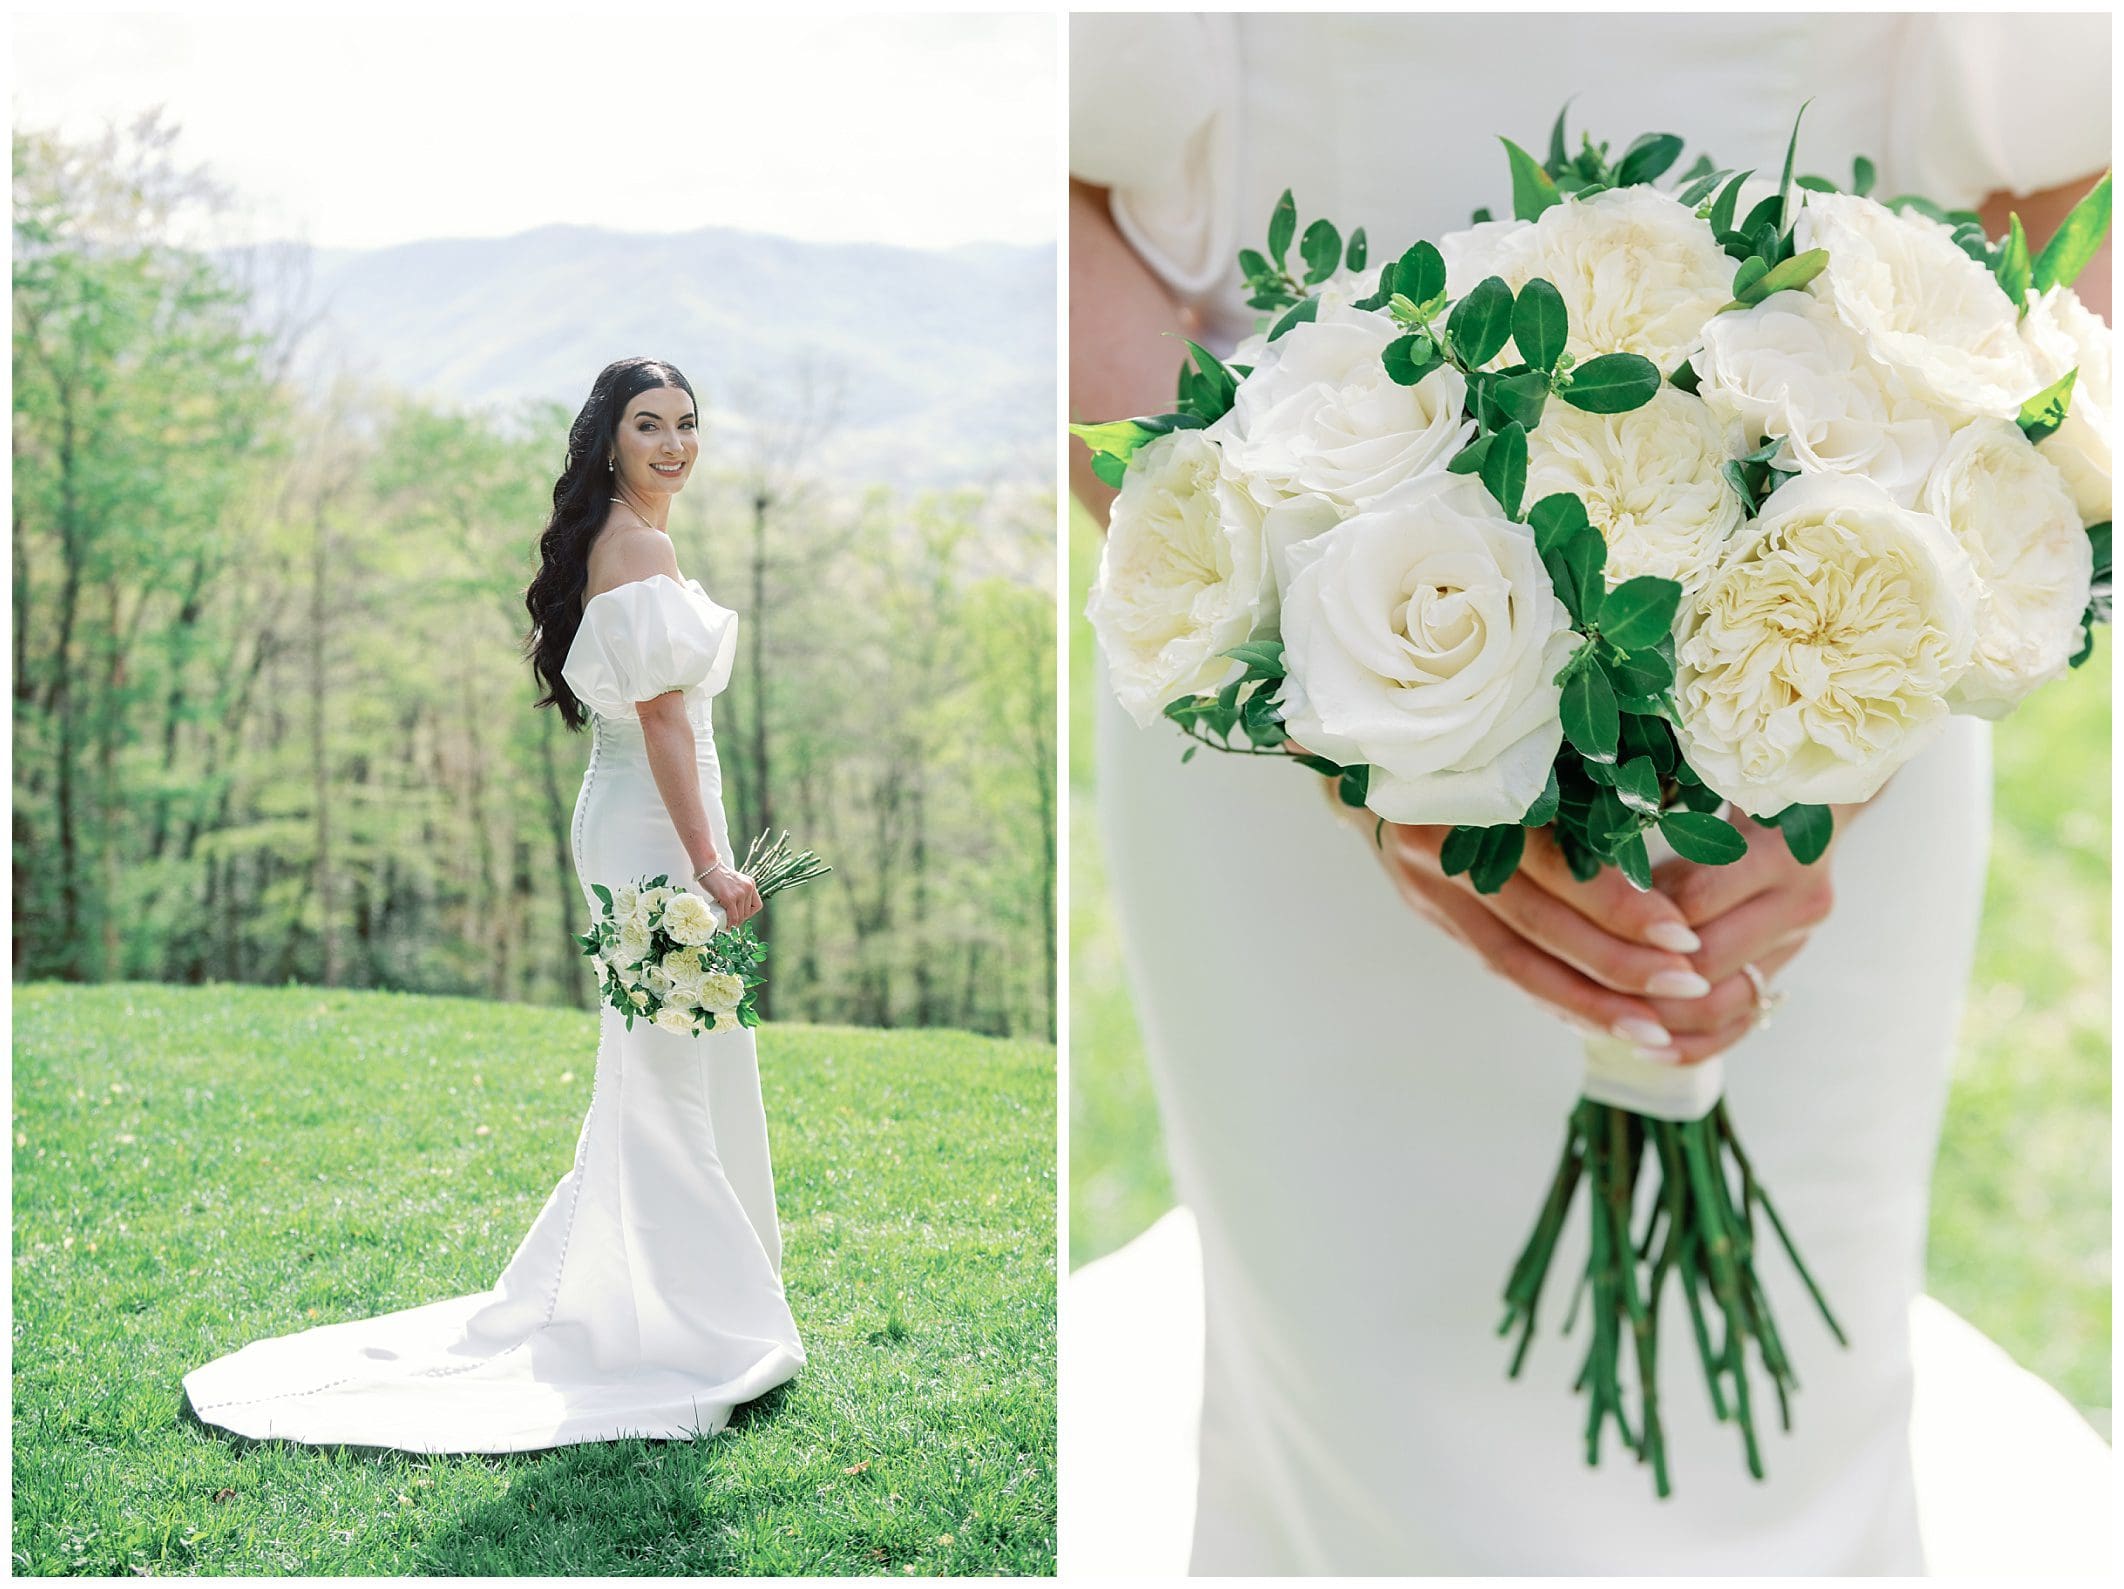 A bride in a white dress holding a bouquet of white roses and greenery, with a scenic mountain landscape in the background.